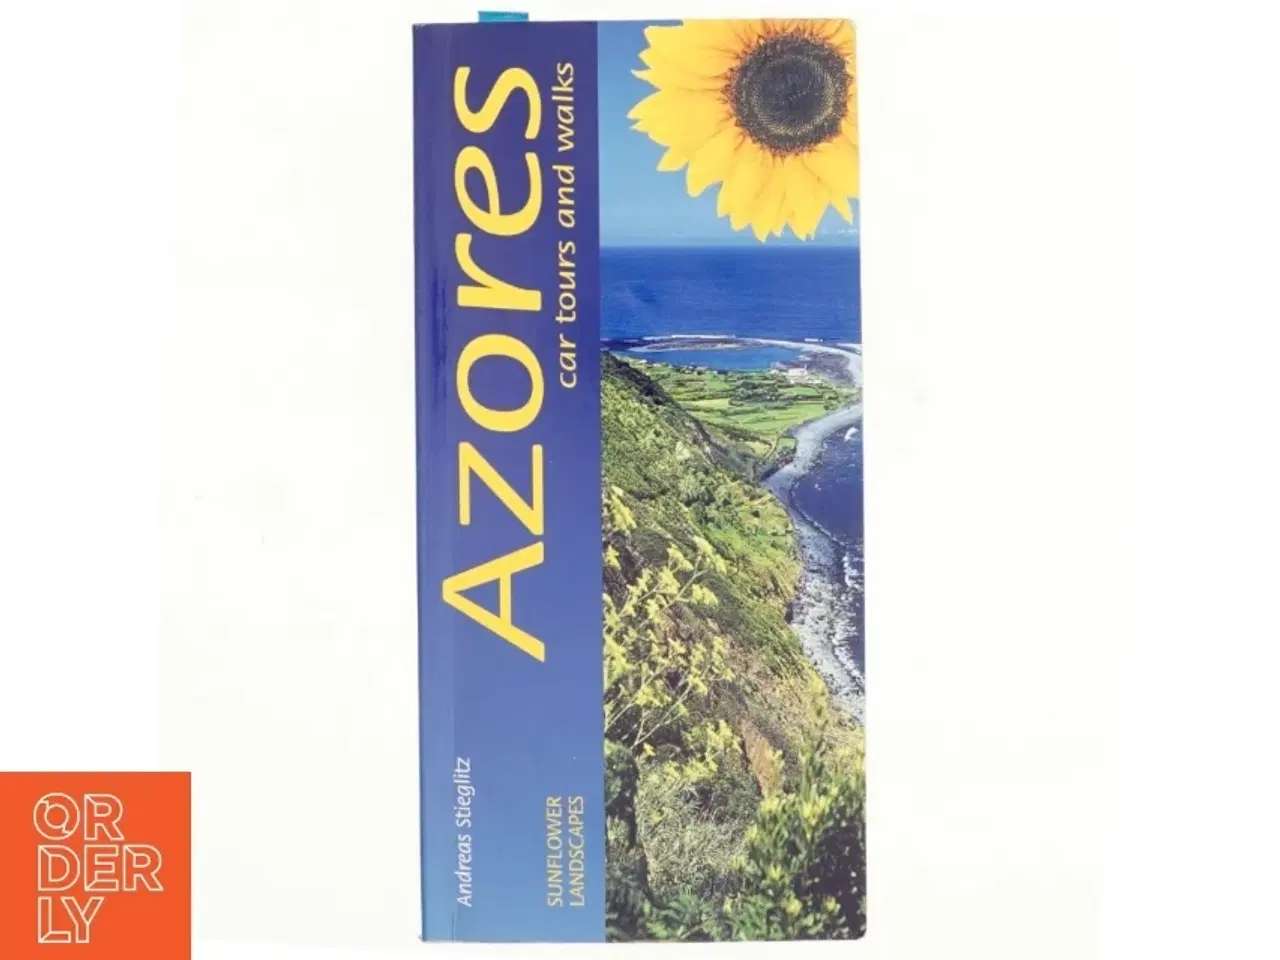 Billede 1 - Landscapes of the Azores : a countryside guide af Andreas Stieglitz (Bog)